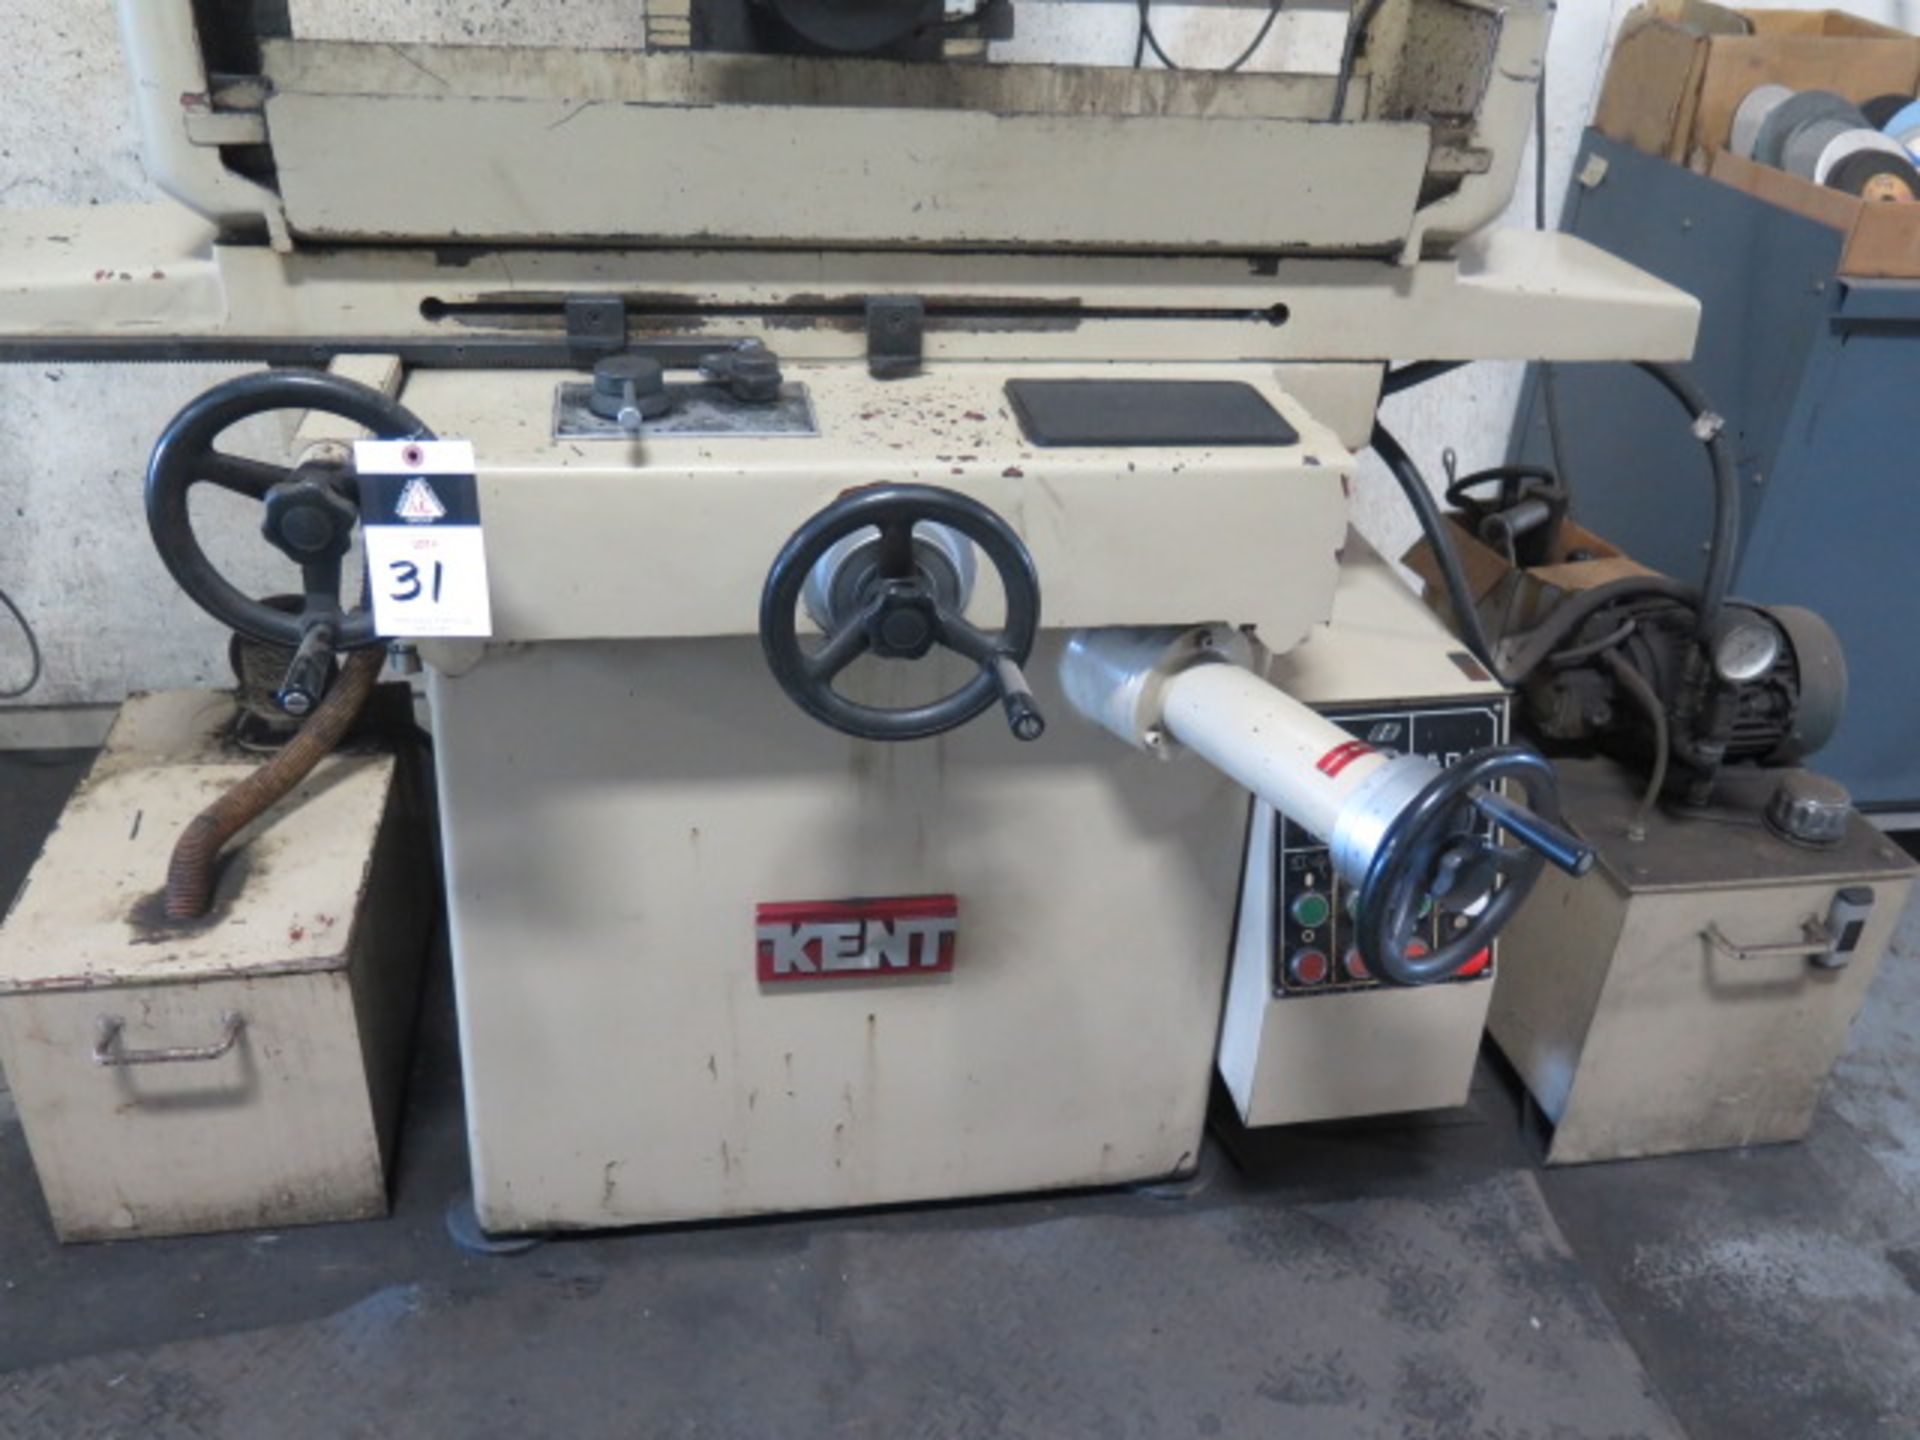 Kent KGS-250AH 8" x 20" Automatic Hyd Surface Grinder s/n 95060111 w/ Electromagnetic, SOLD AS IS - Image 5 of 12